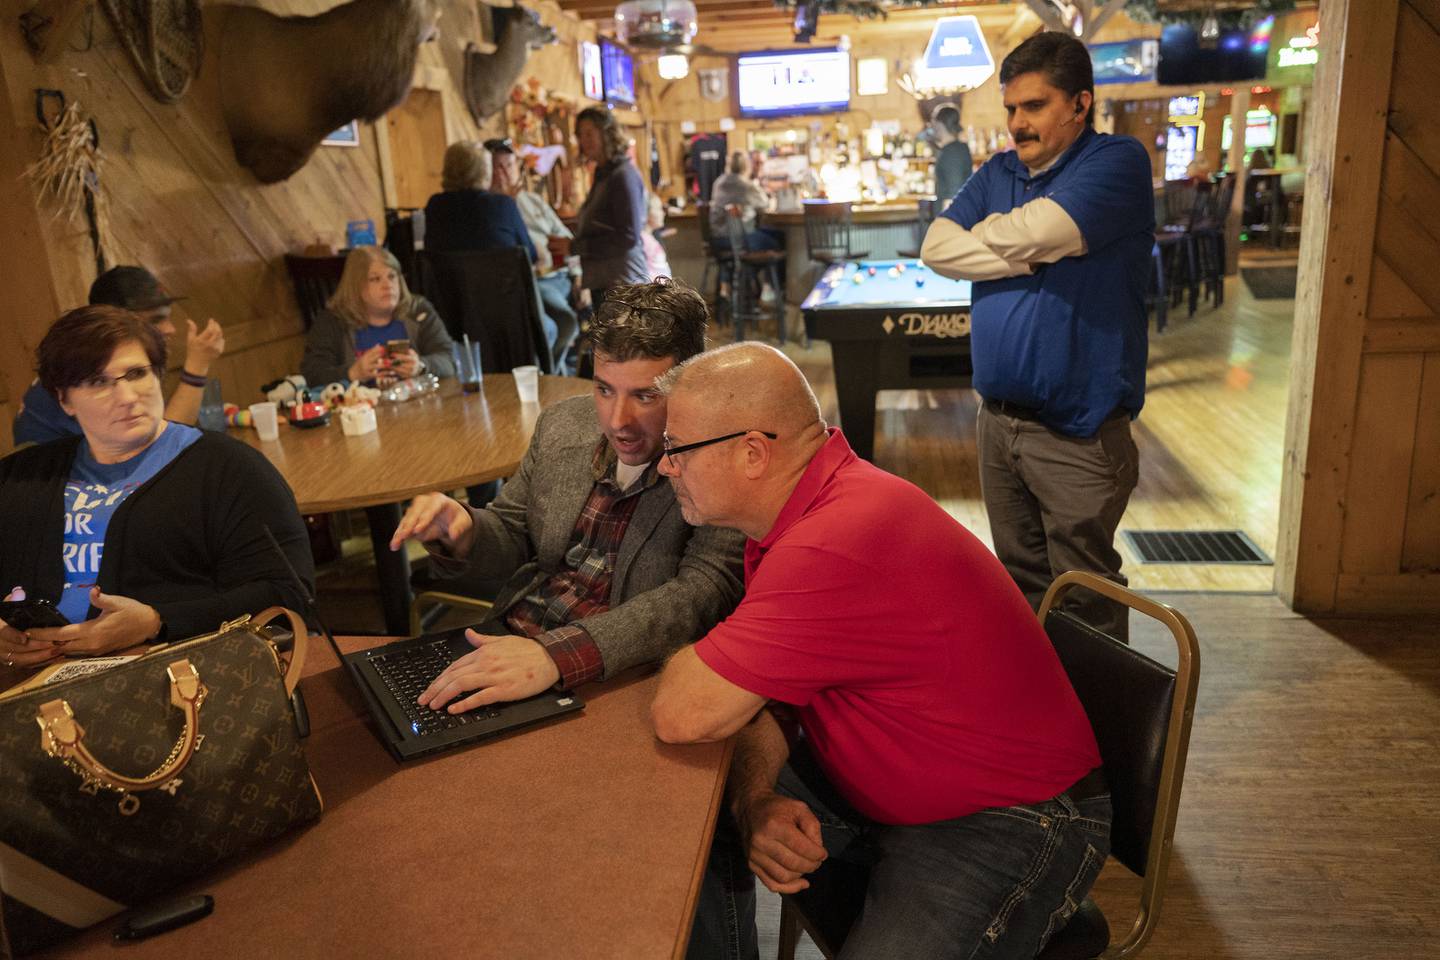 Louis Pignatelli (left) and Mike Lewis check results Tuesday, Nov. 8, 2022 at Wagon Wheel in Sterling.